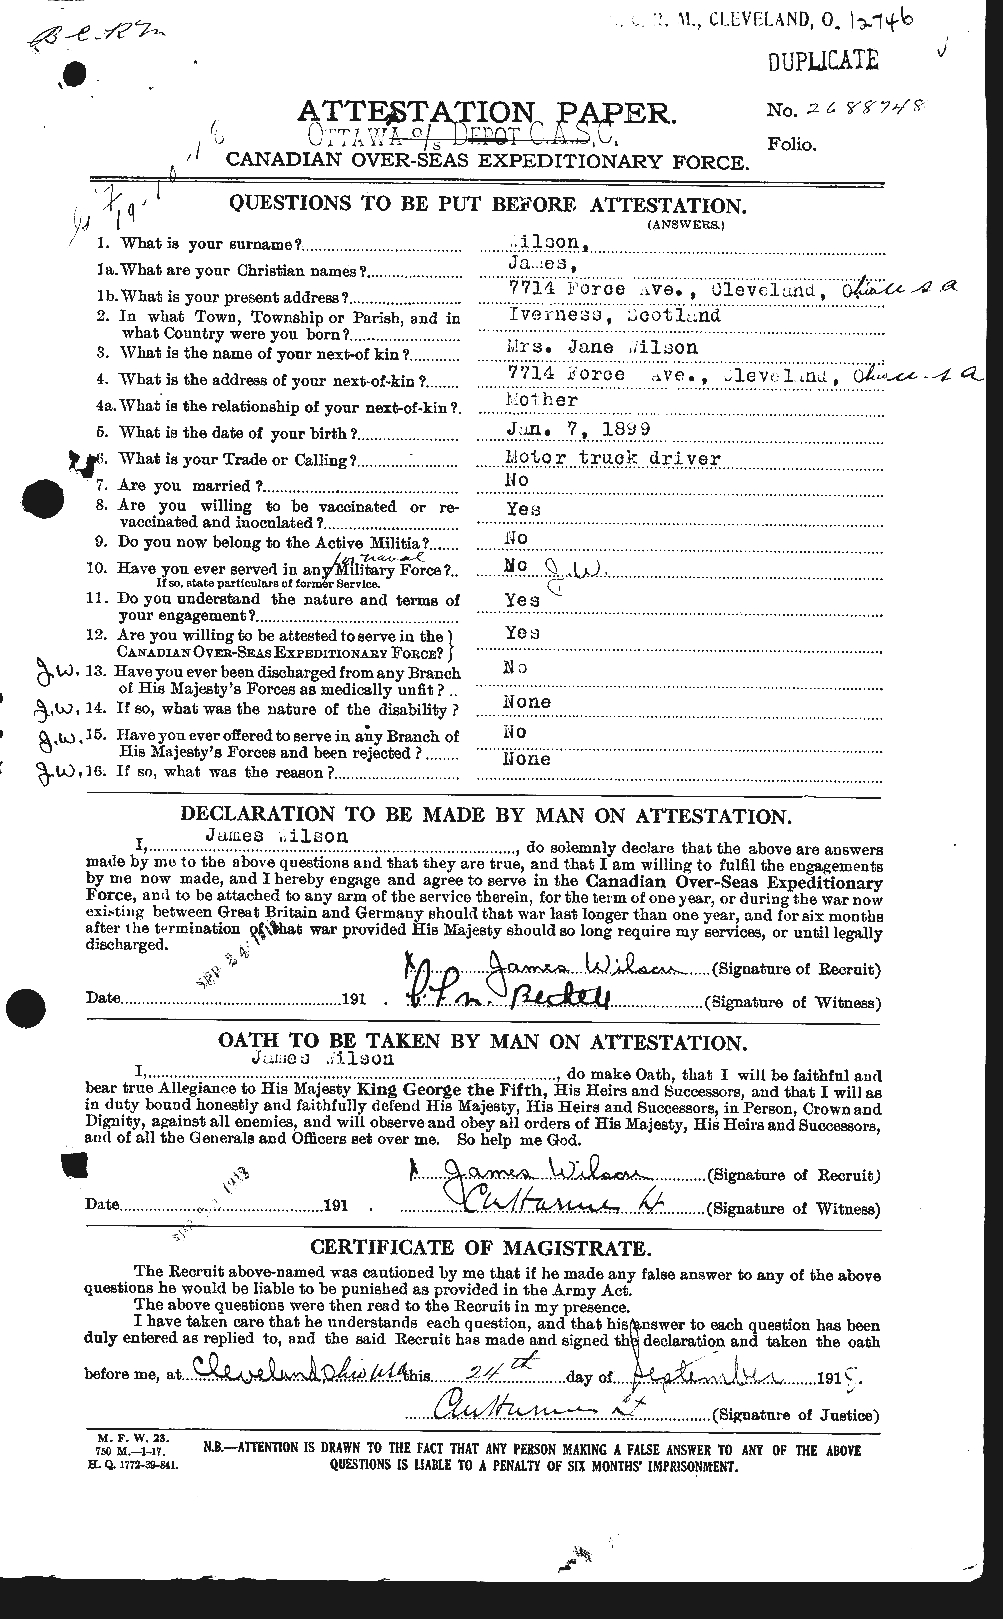 Personnel Records of the First World War - CEF 681398a